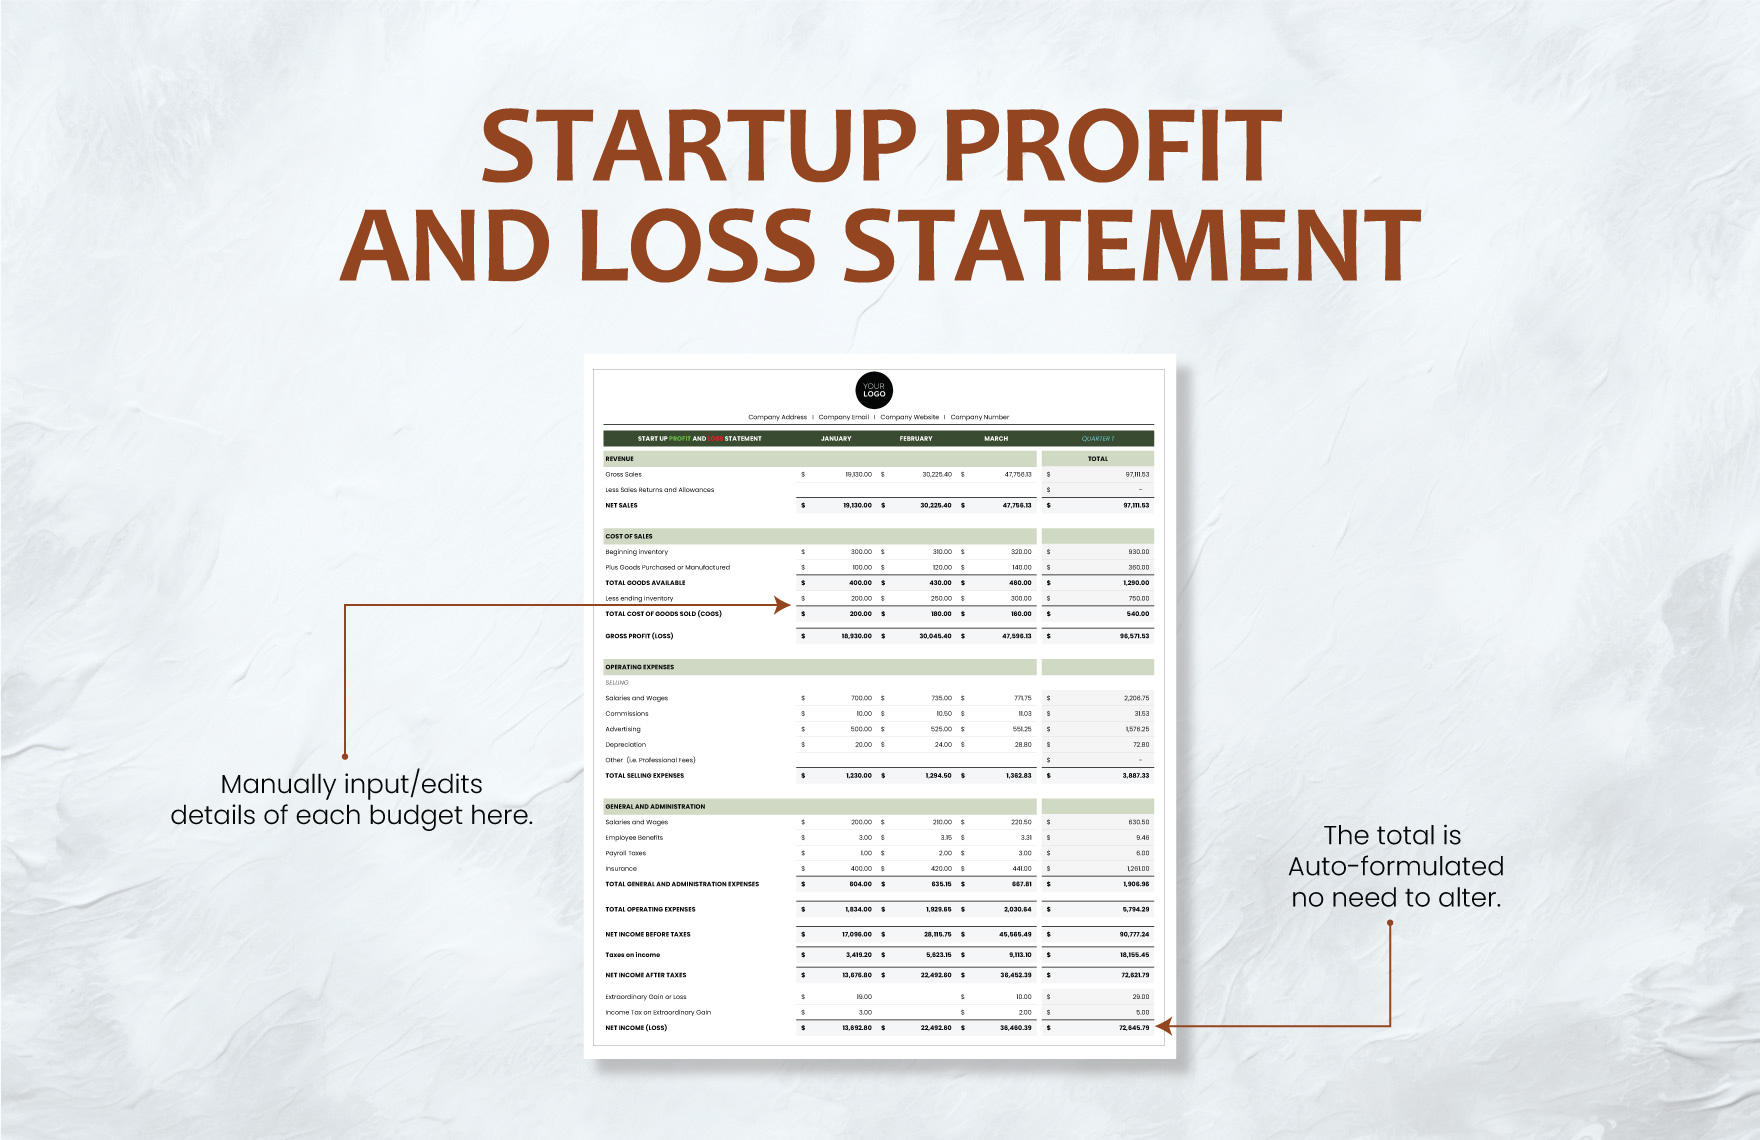 Startup Profit and Loss Statement Template